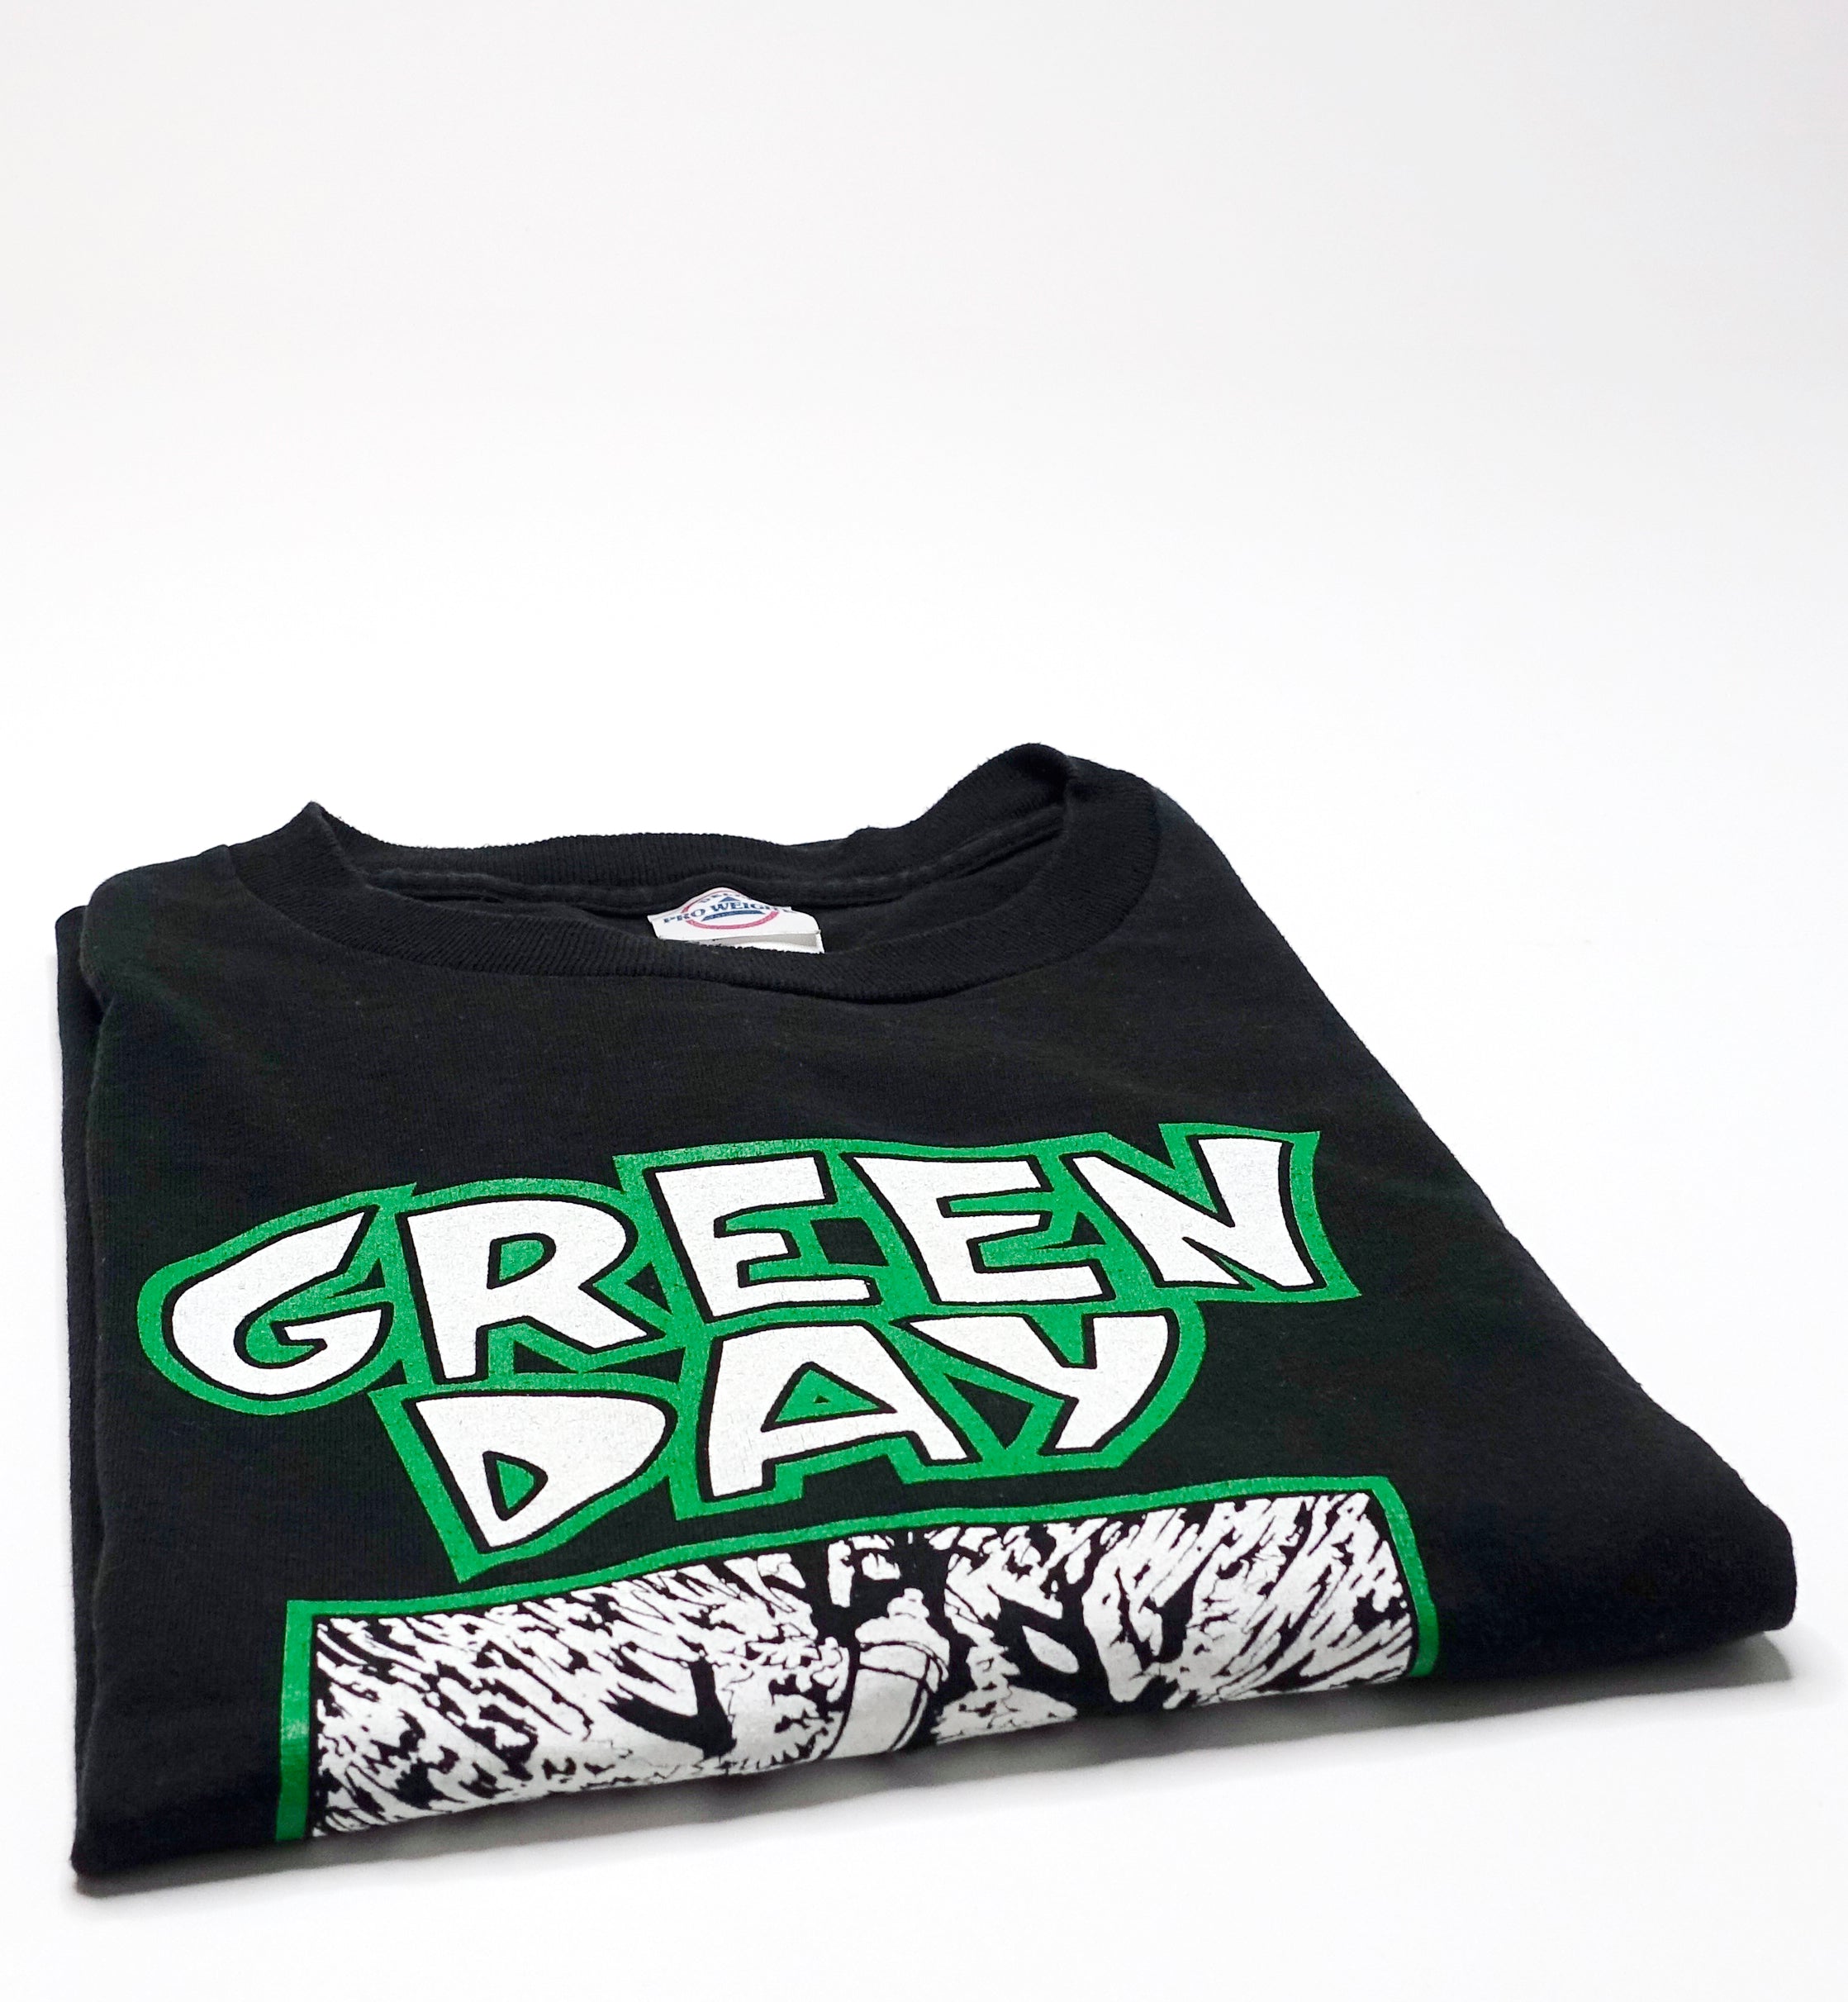 Green Day - 39/Smooth 2004 Shirt (Delta) Size Large